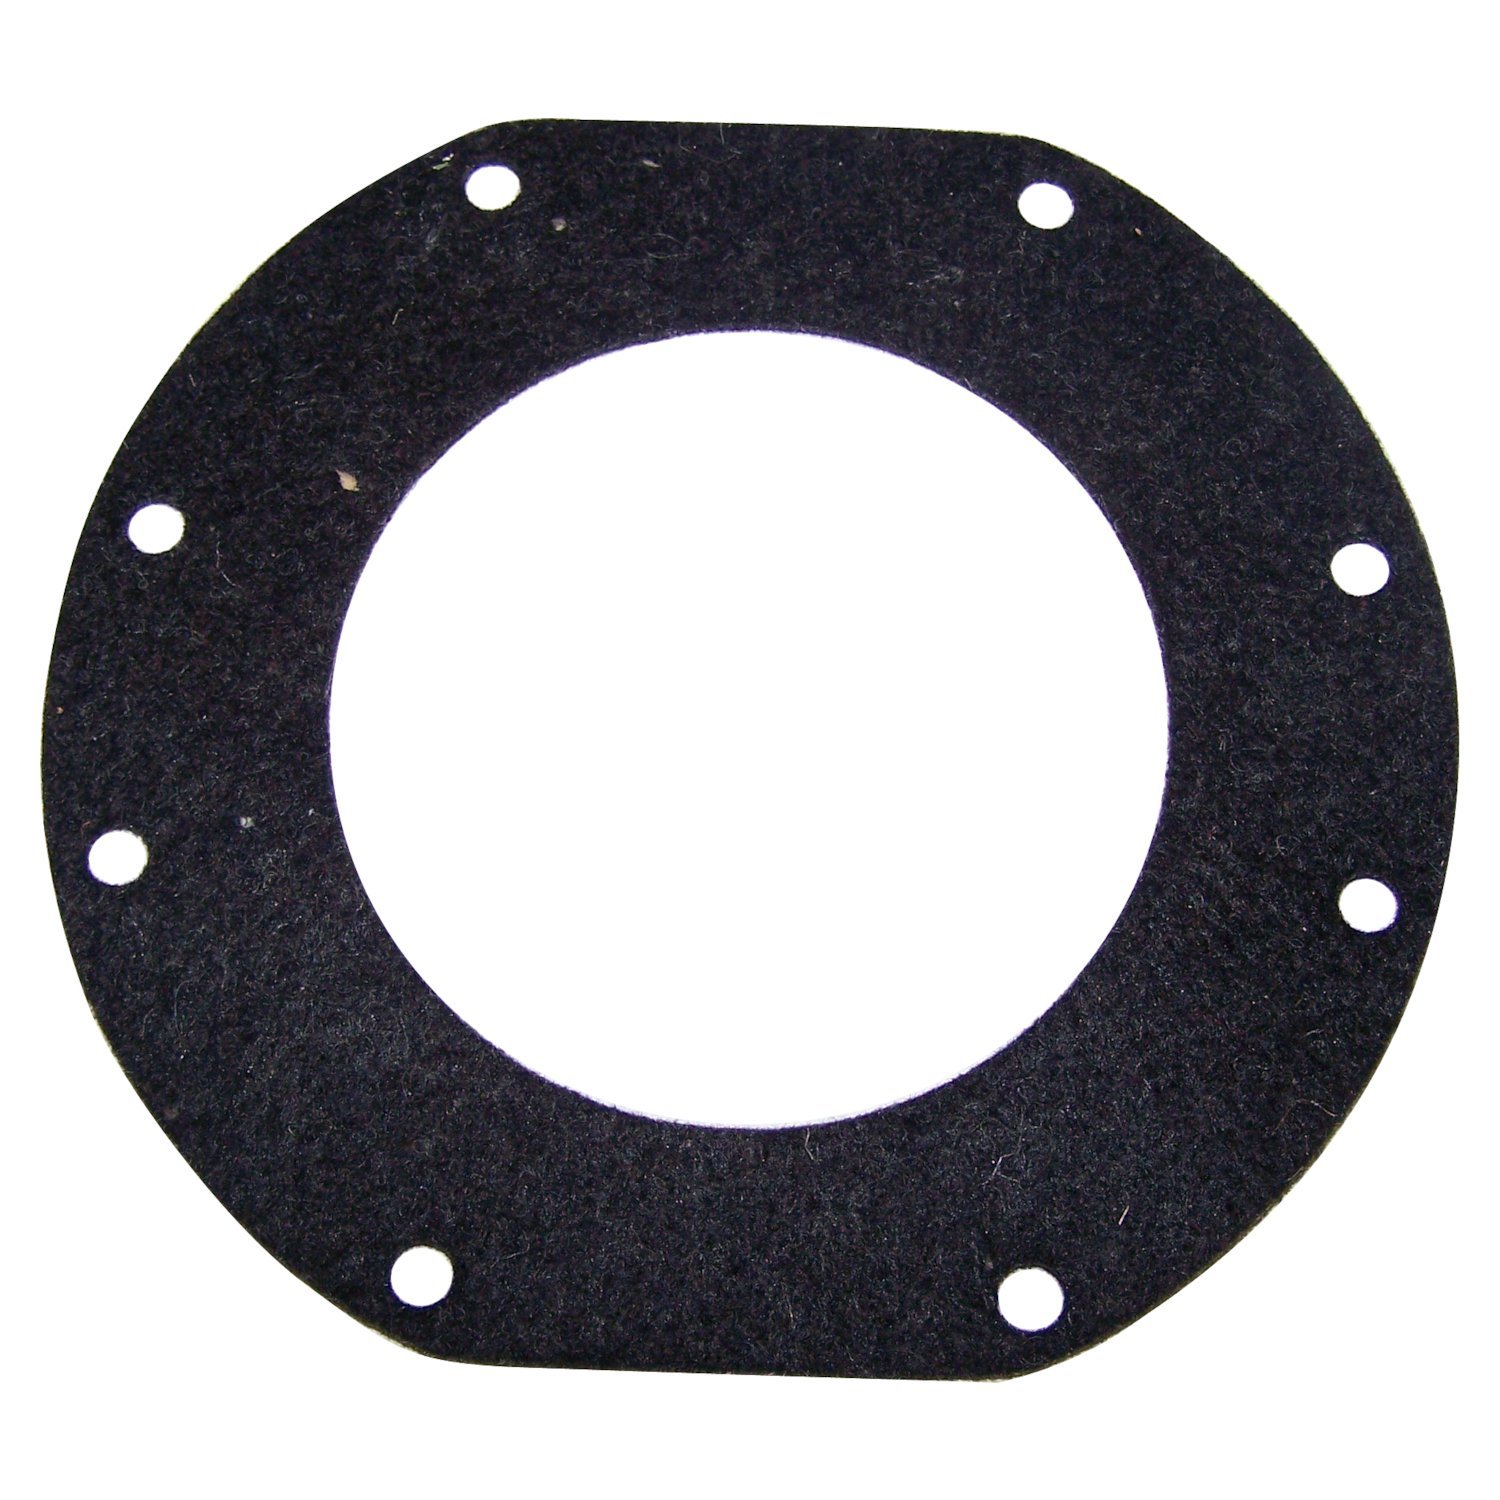 Felt Steering Knuckle Seal for Numerous Jeep Models w/ D25, D27 or D44 Axles